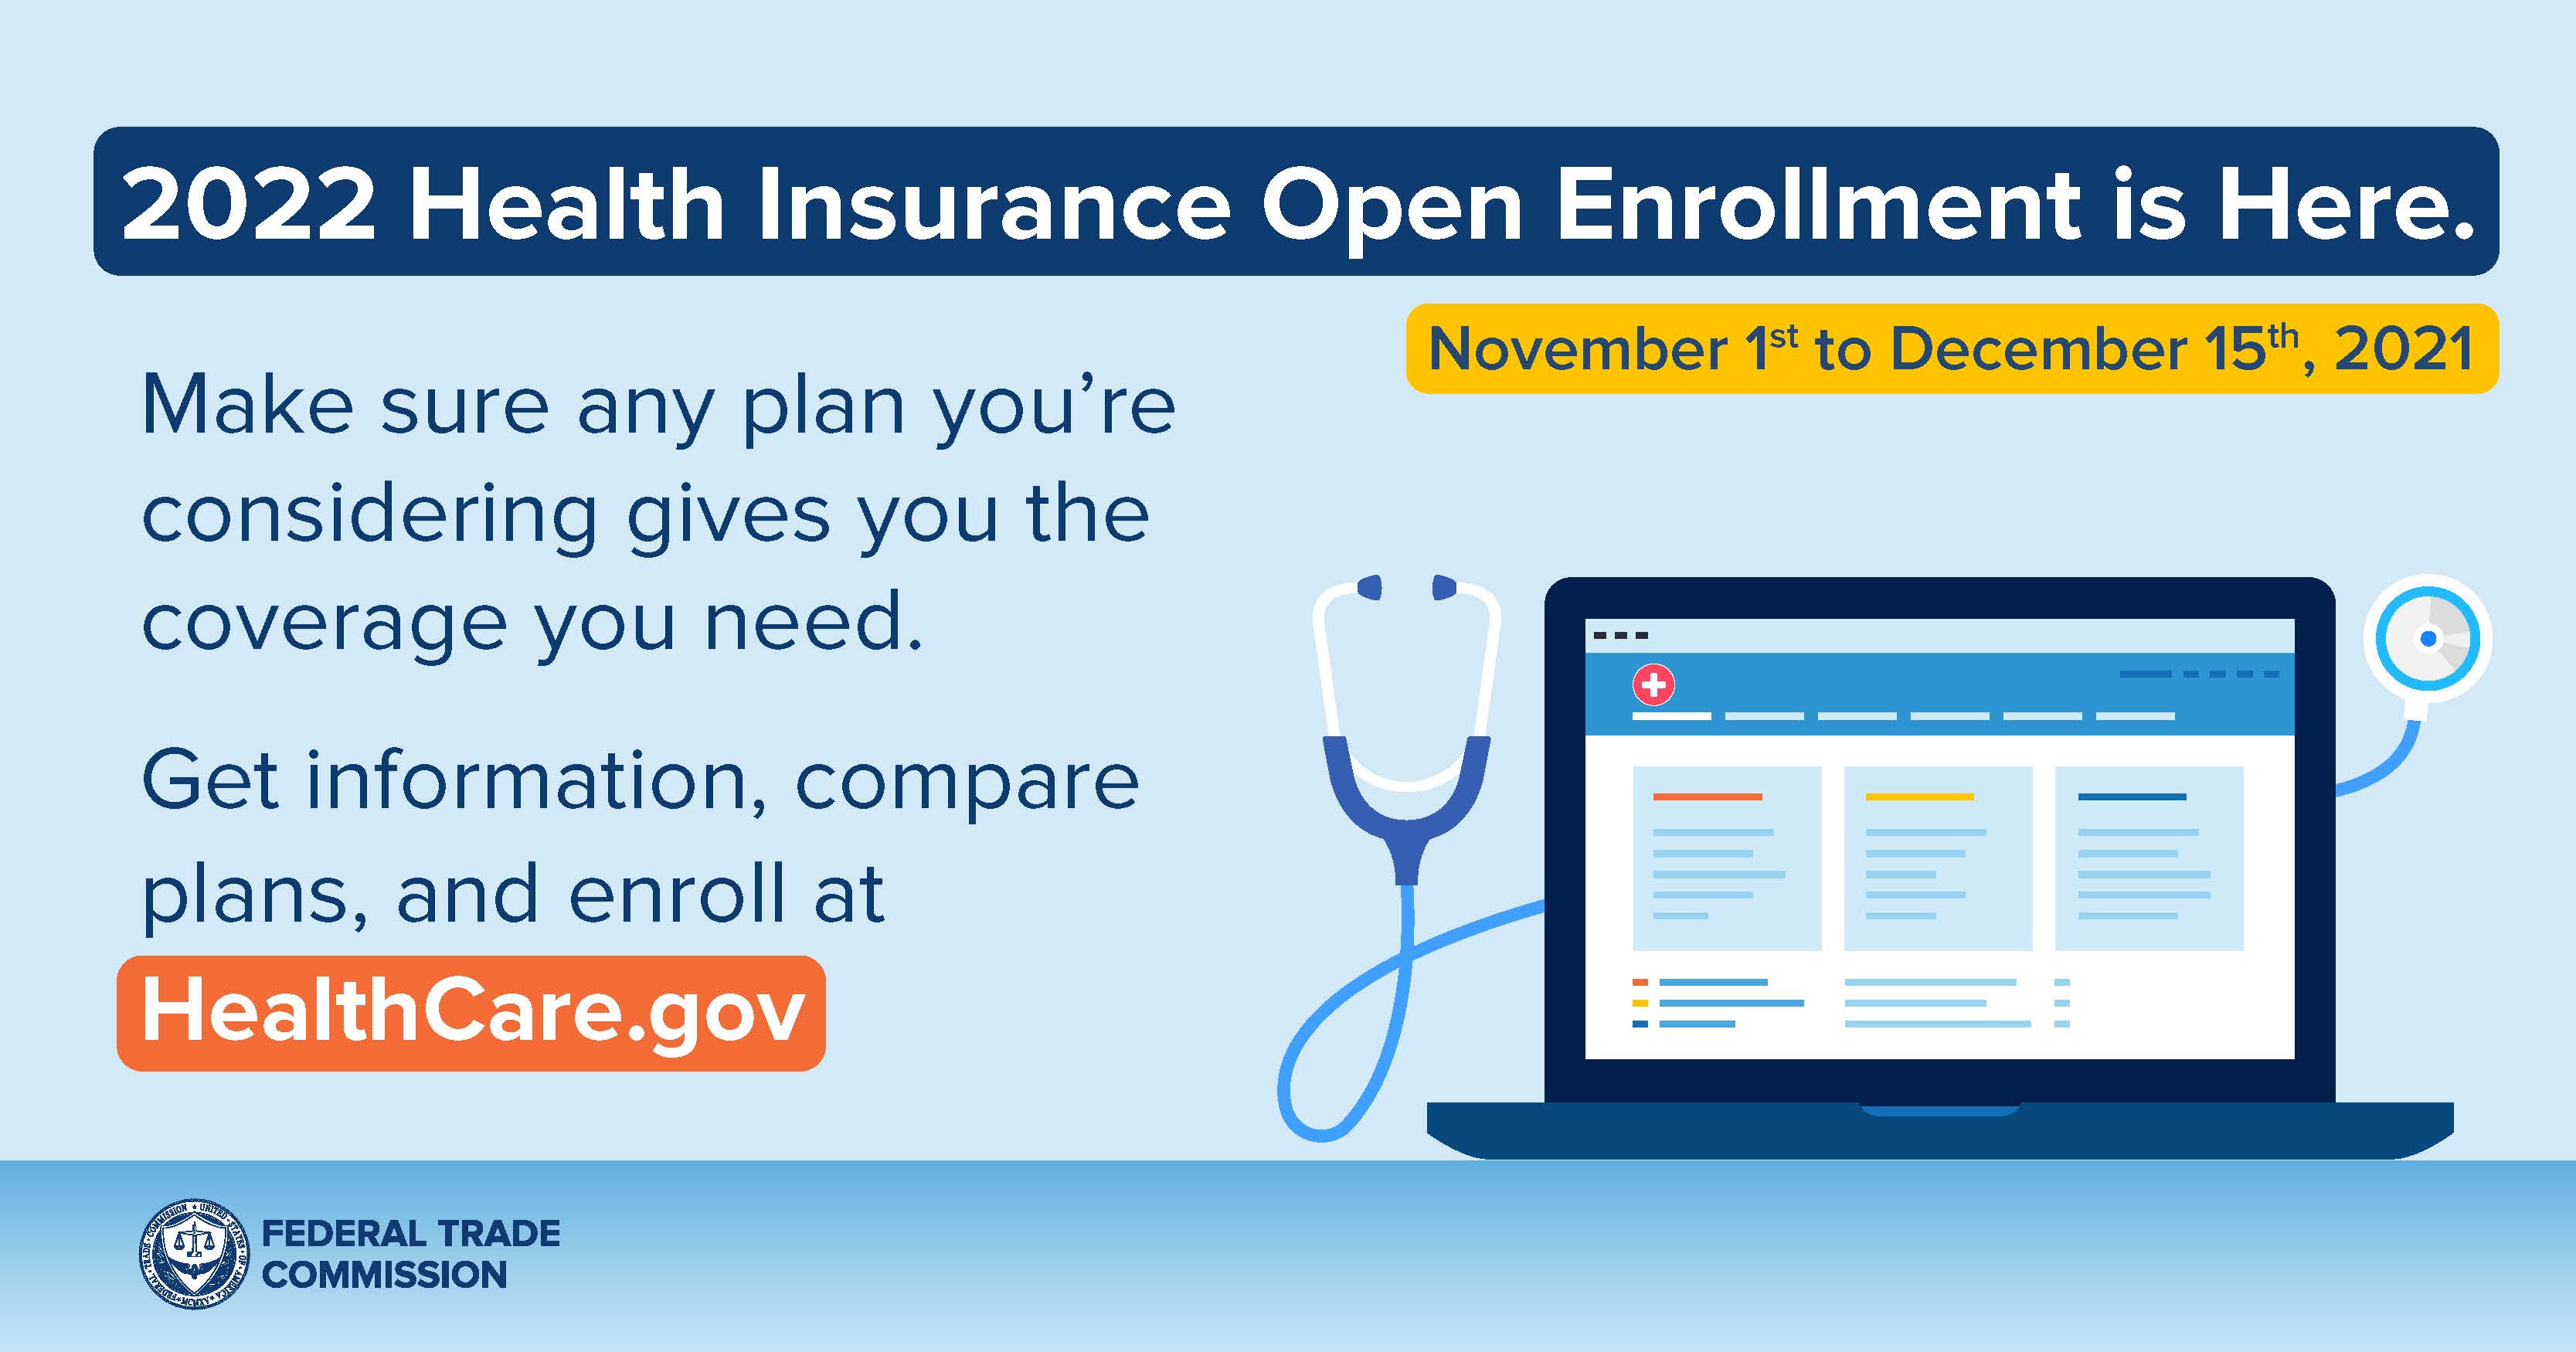 how to get health insurance after open enrollment?